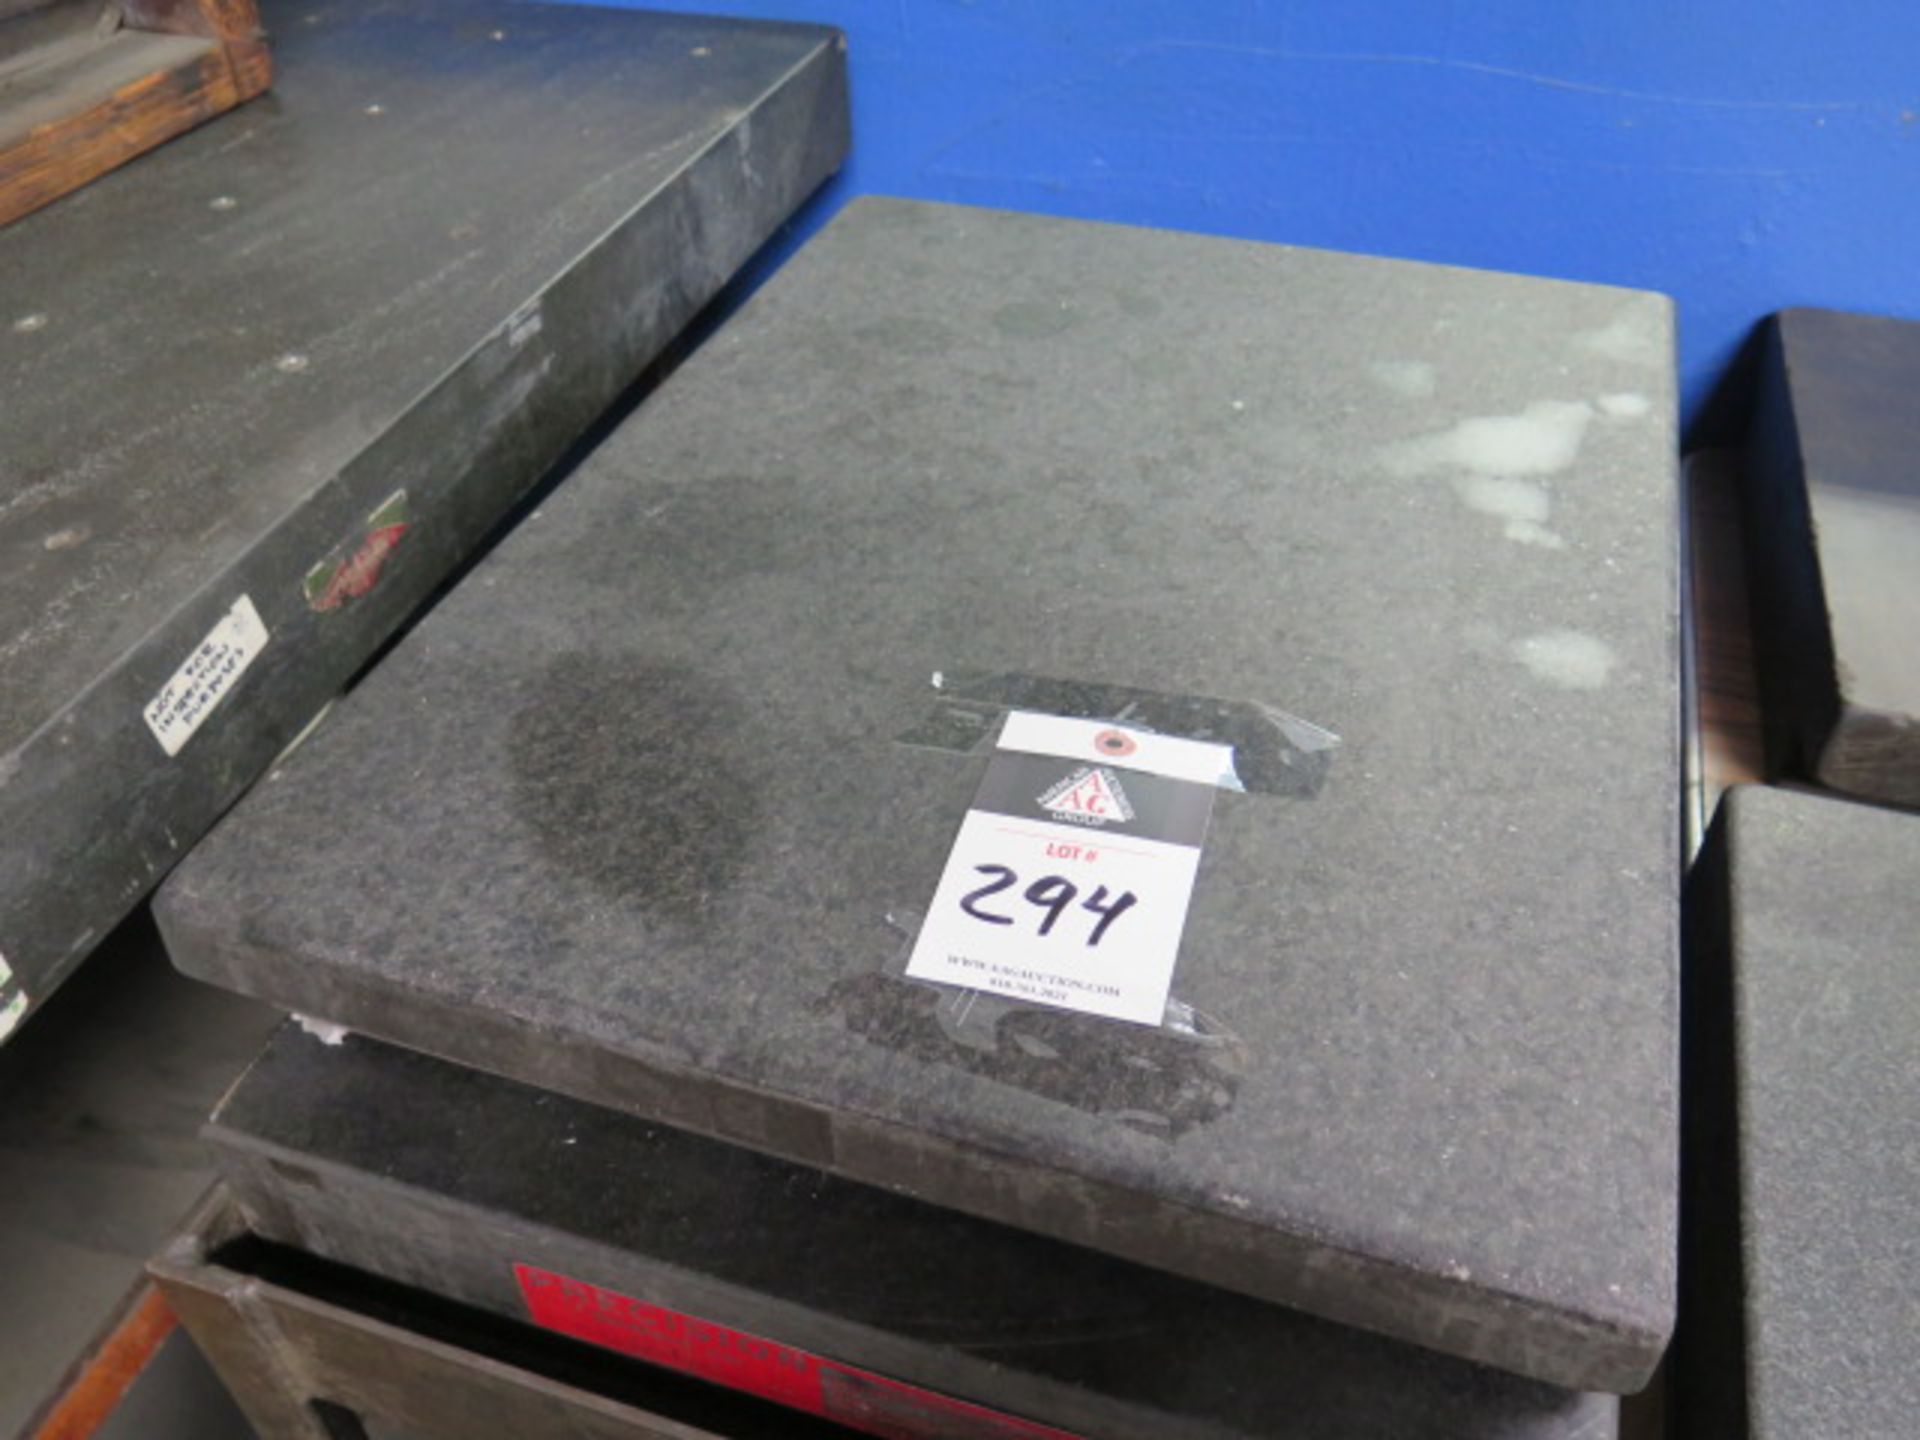 18" x 24" x 3" Granite Surface Plates (2) w/ Cart (SOLD AS-IS - NO WARRANTY)